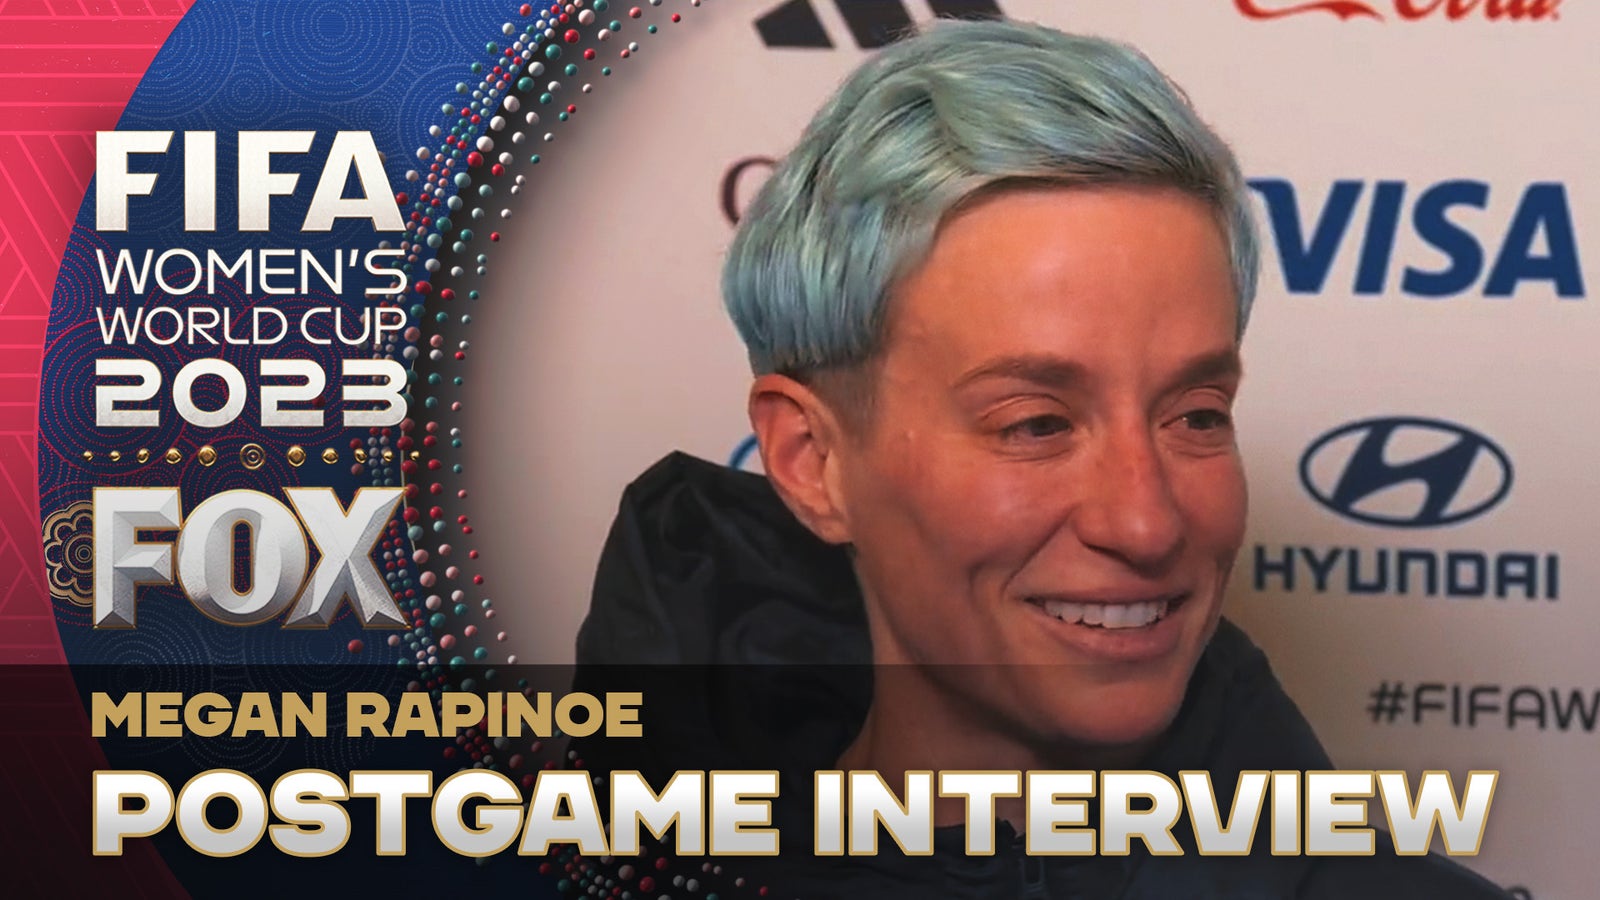 "It's been an honor" — Megan Rapinoe on her final World Cup game